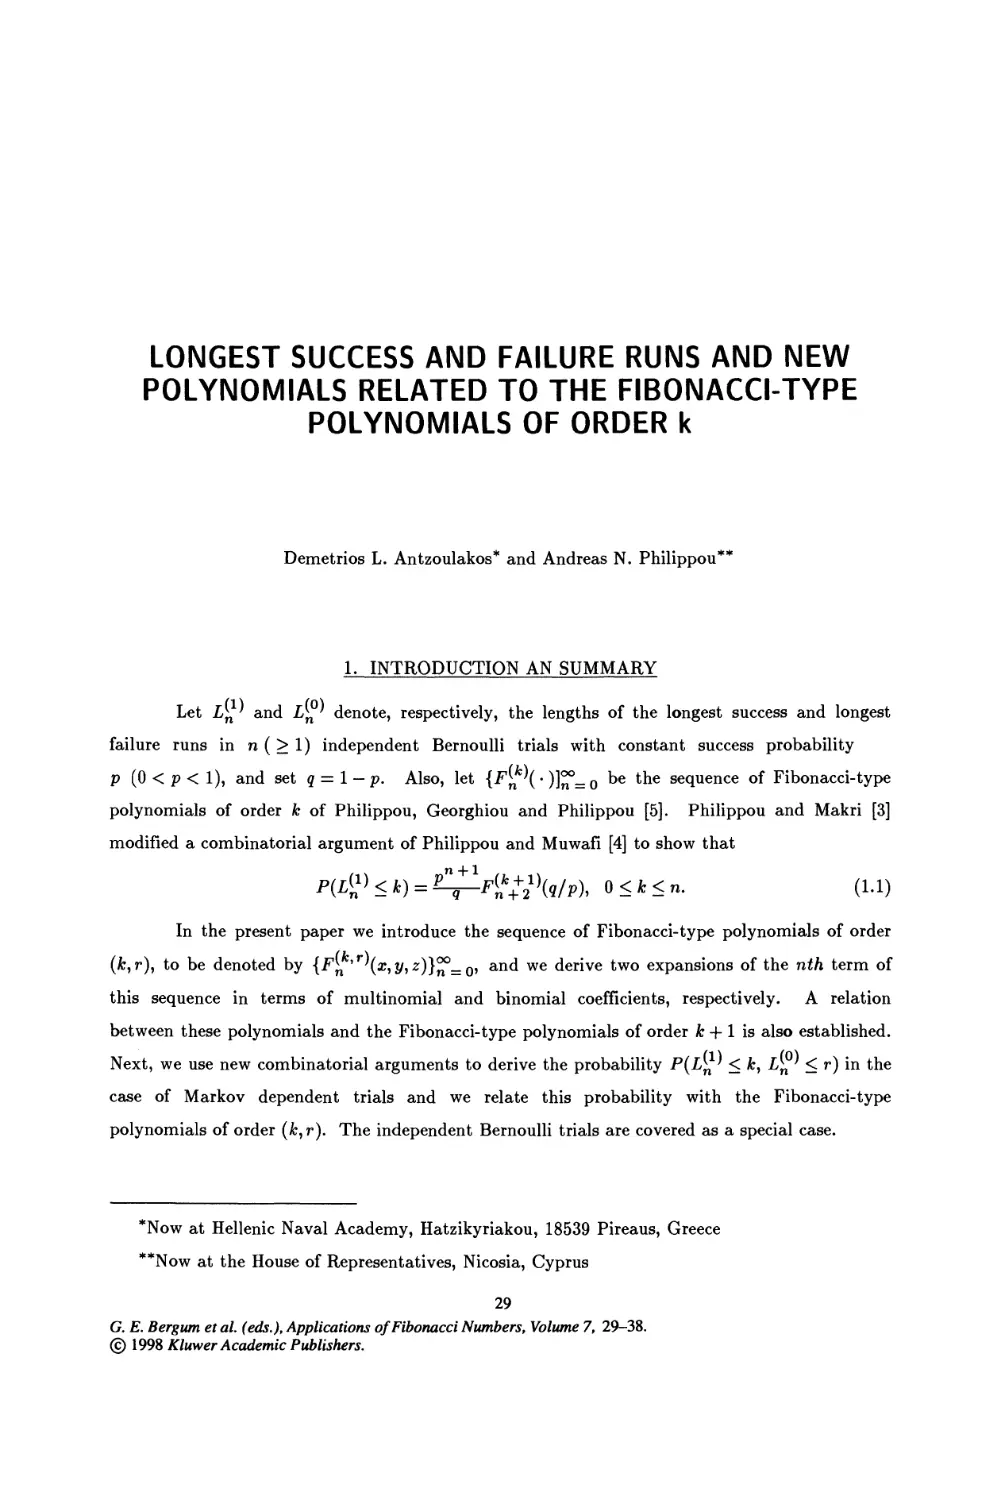 5. Longest Success and Failure Runs and New Polynomials Related to The Fibonacci-Type Polynomials of Order k